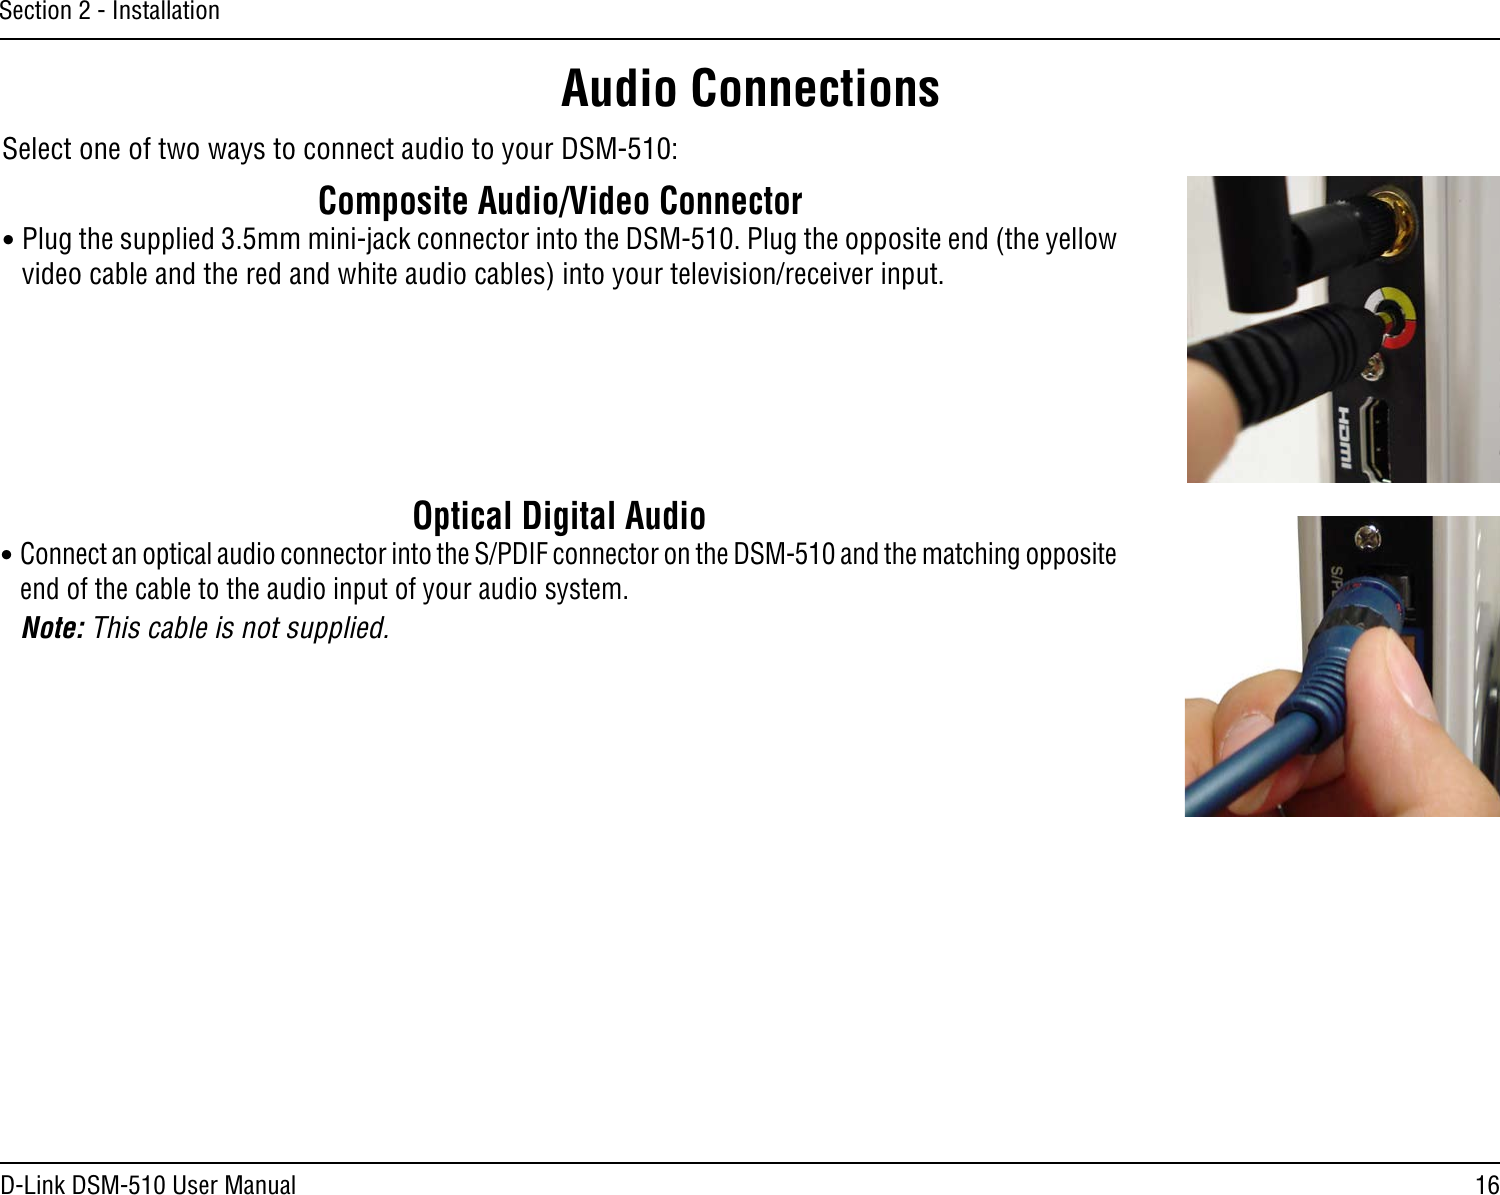 16D-Link DSM-510 User ManualSection 2 - InstallationAudio ConnectionsSelect one of two ways to connect audio to your DSM-510:Optical Digital Audio• Connect an optical audio connector into the S/PDIF connector on the DSM-510 and the matching opposite end of the cable to the audio input of your audio system.  Note: This cable is not supplied.Composite Audio/Video Connector• Plug the supplied 3.5mm mini-jack connector into the DSM-510. Plug the opposite end (the yellow video cable and the red and white audio cables) into your television/receiver input.